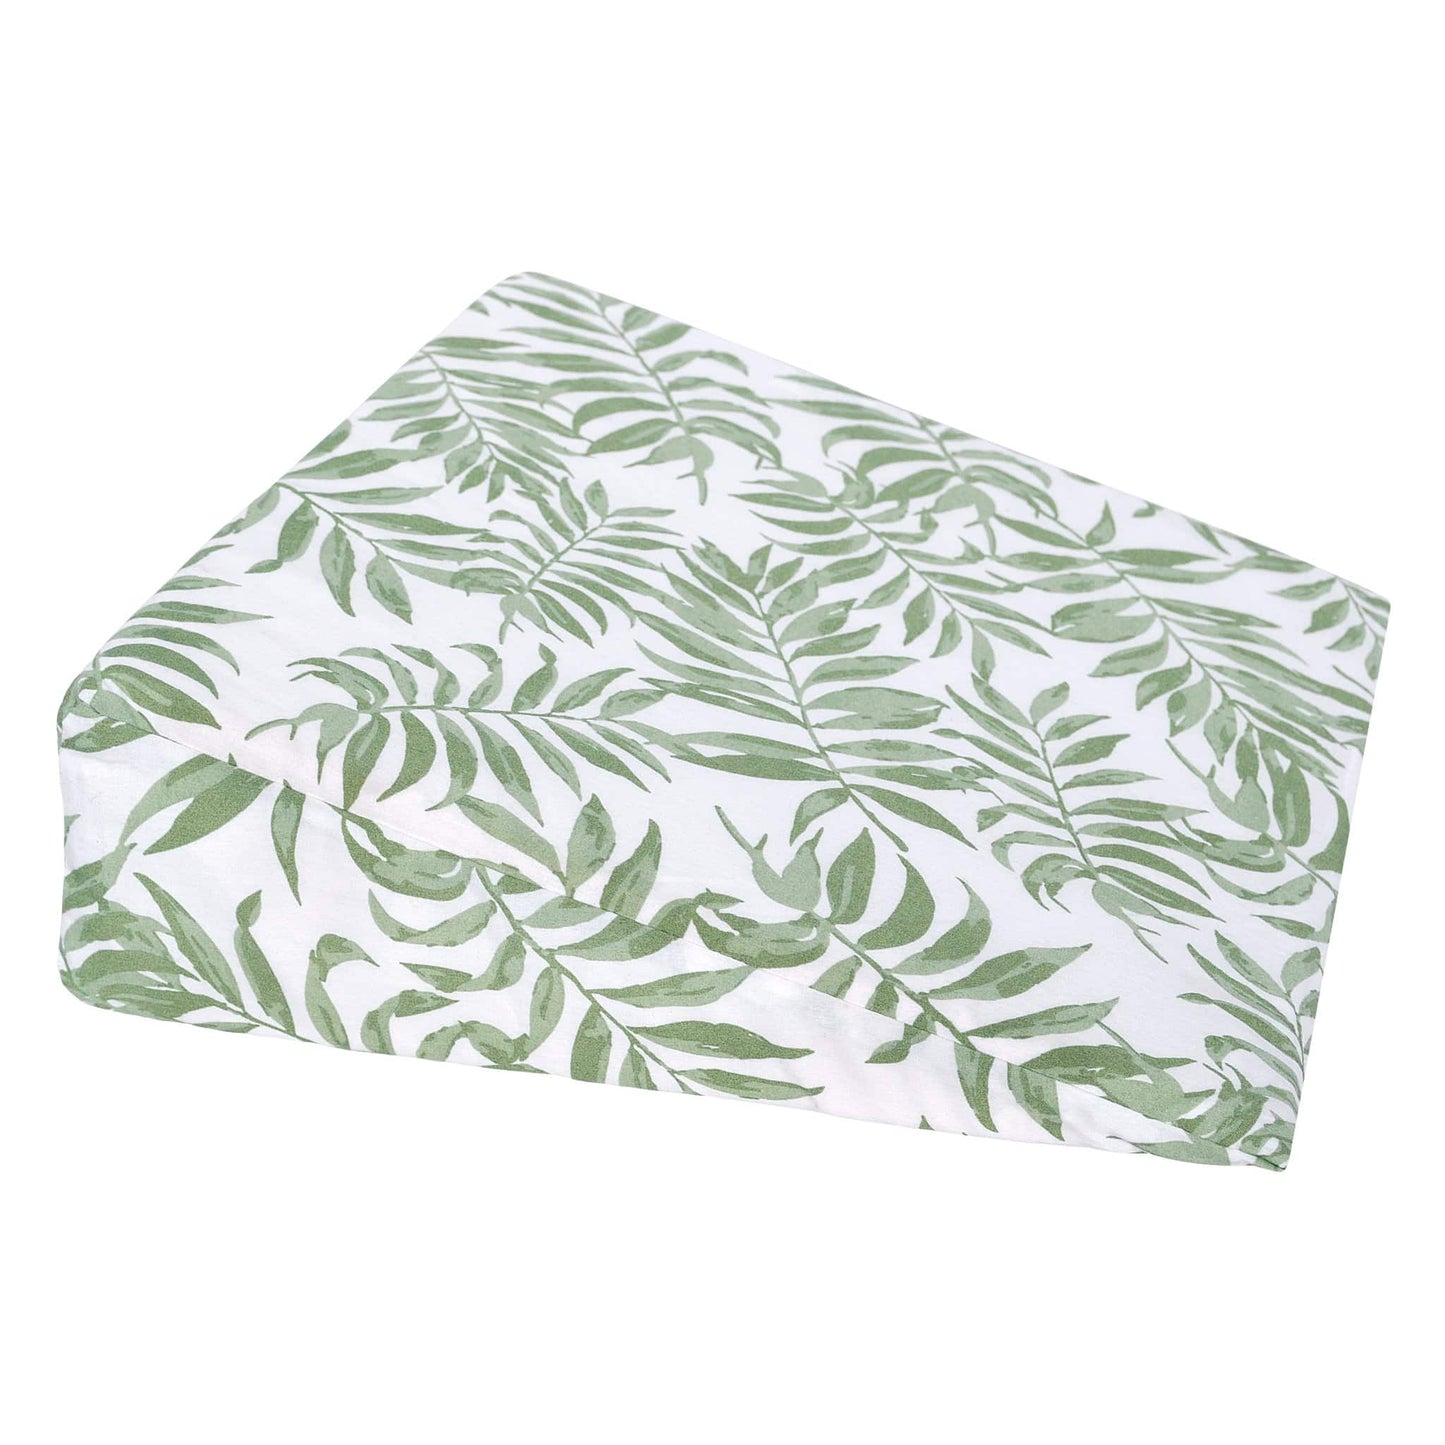 Wedge pillow - Tropical green